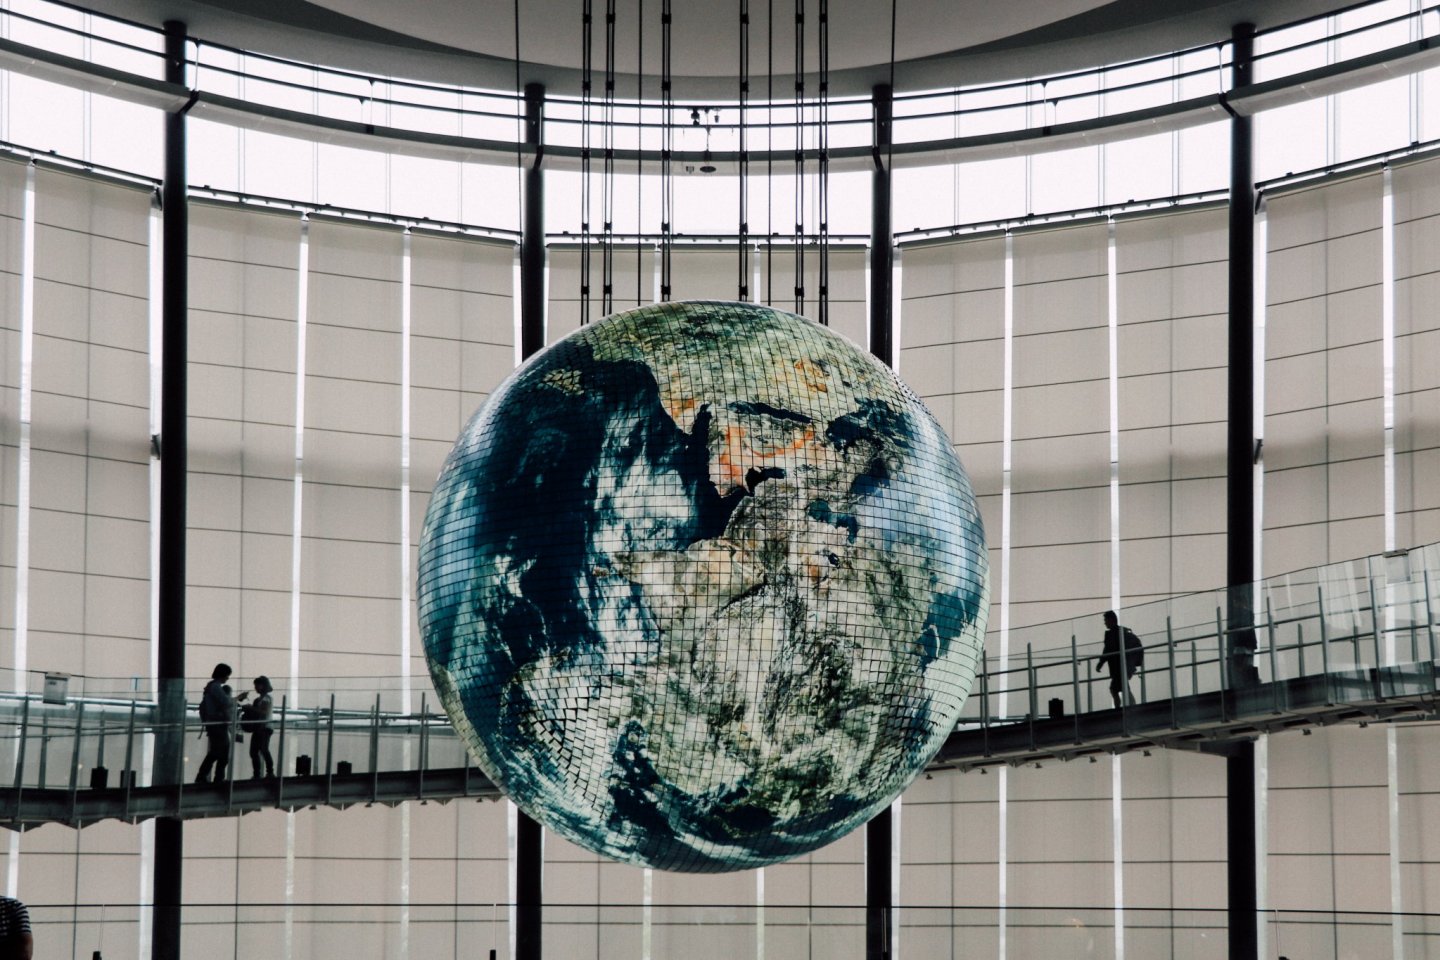 A huge globe hangs between levels 3 and 5 showing a week\'s worth of satellite and weather data.